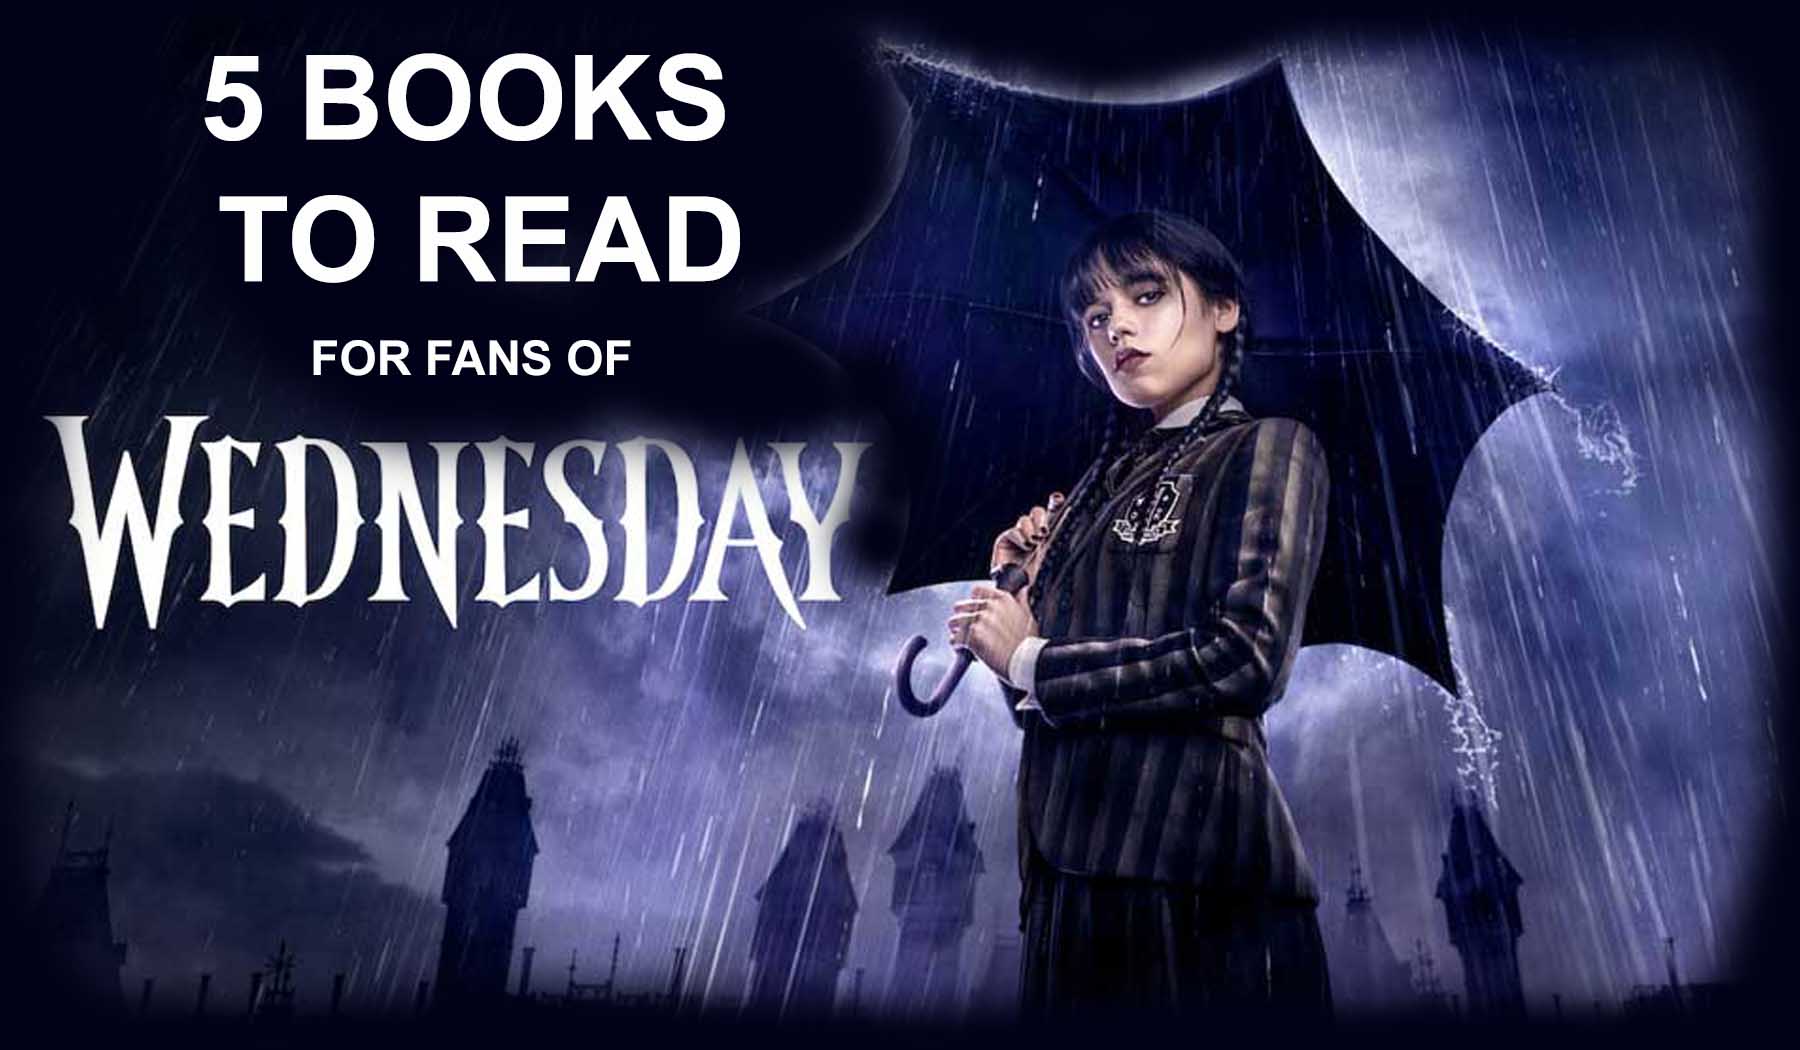 5 Books To Read For Fans of the Wednesday Netflix Series Worlds Best